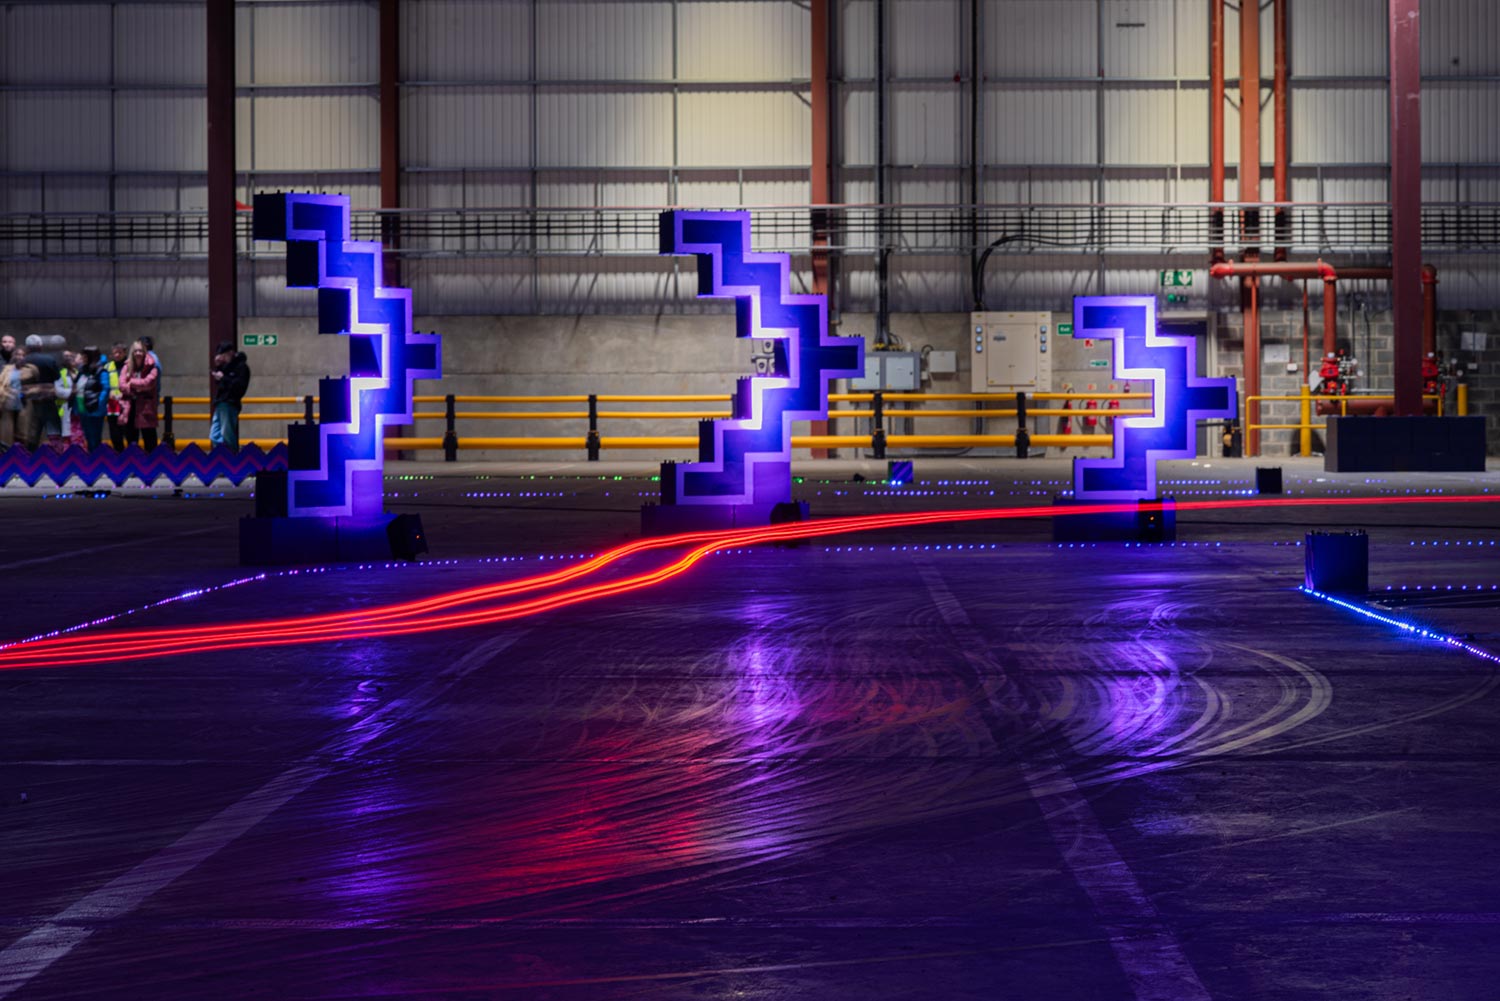 Light streaks from go-kart tail lights swoop past on the corner of a purple illumintaed racetrack.